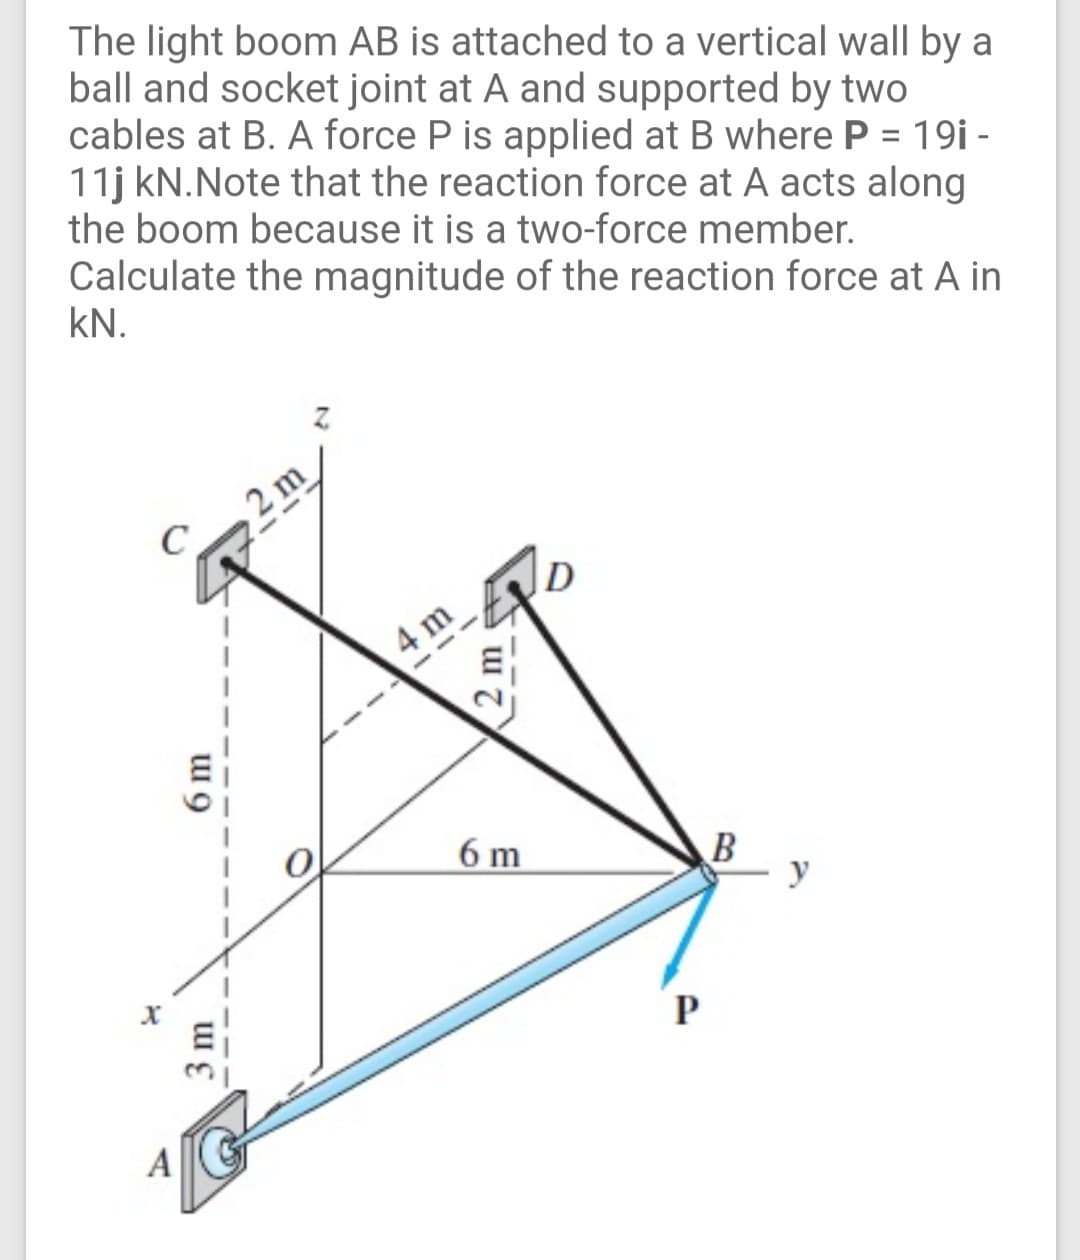 The light boom AB is attached to a vertical wall by a
ball and socket joint at A and supported by two
cables at B. A force P is applied at B where P = 19i -
11j kN.Note that the reaction force at A acts along
the boom because it is a two-force member.
Calculate the magnitude of the reaction force at A in
kN.
?m
4 m
6 m
B
y
A
3 m
6m
2 m
